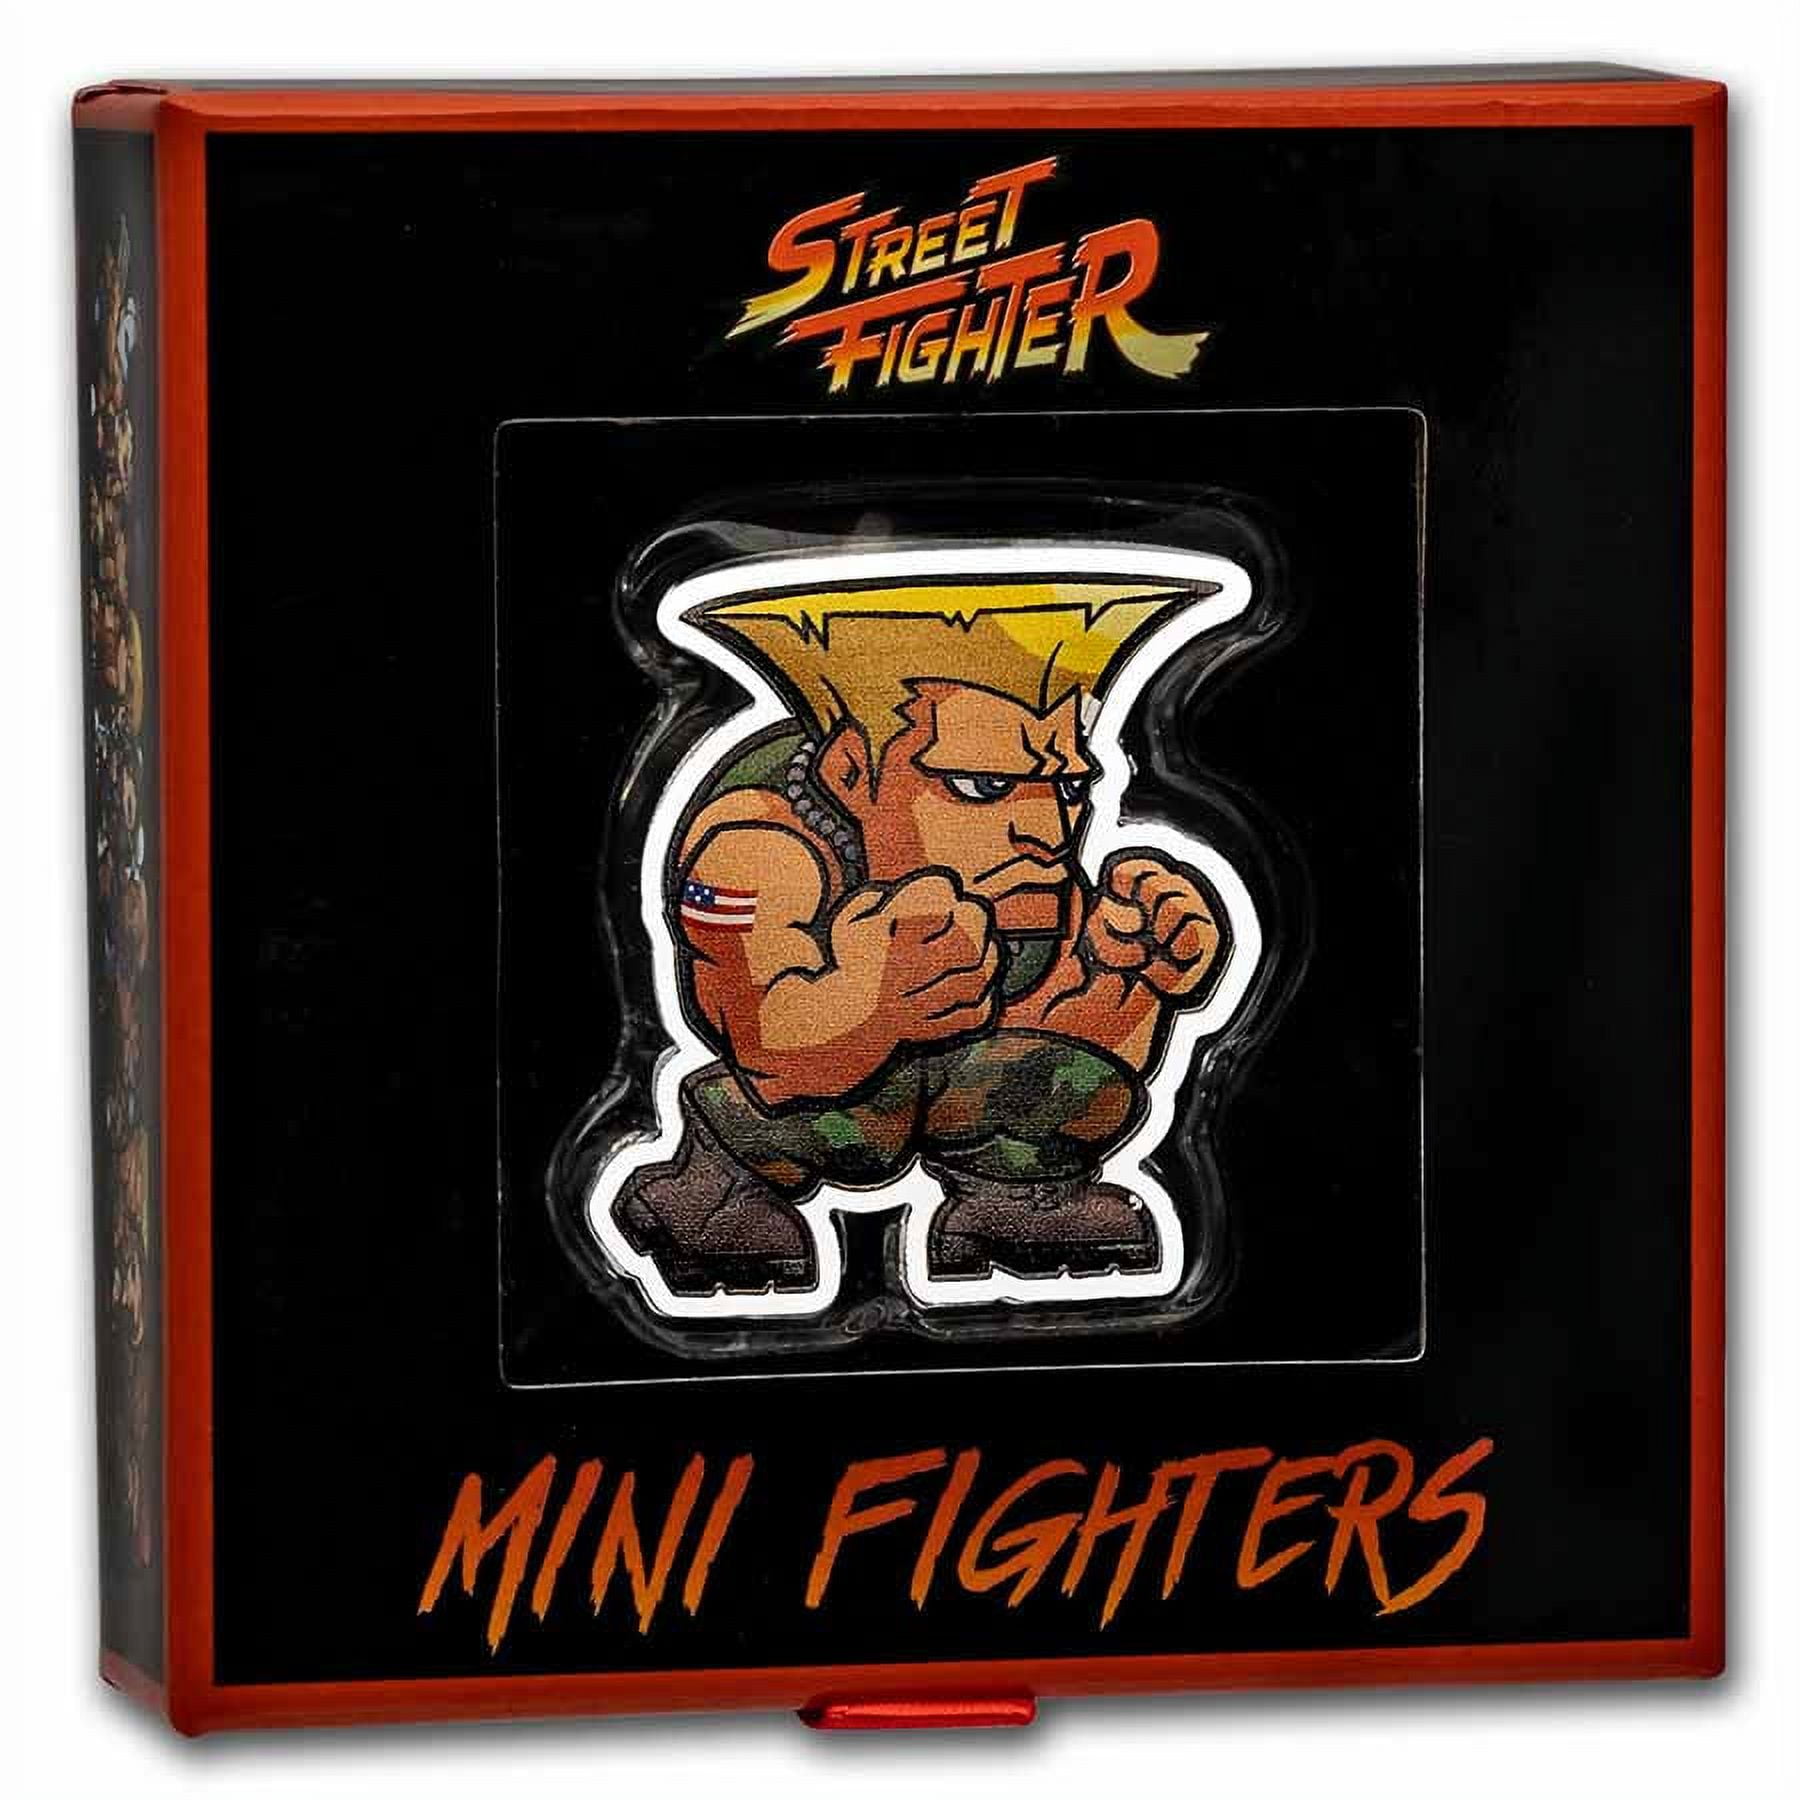 2022 1 oz Fiji Street Fighter Mini Fighters - Guile 999 Silver Coloured  Proof Coin (Certificate #8)